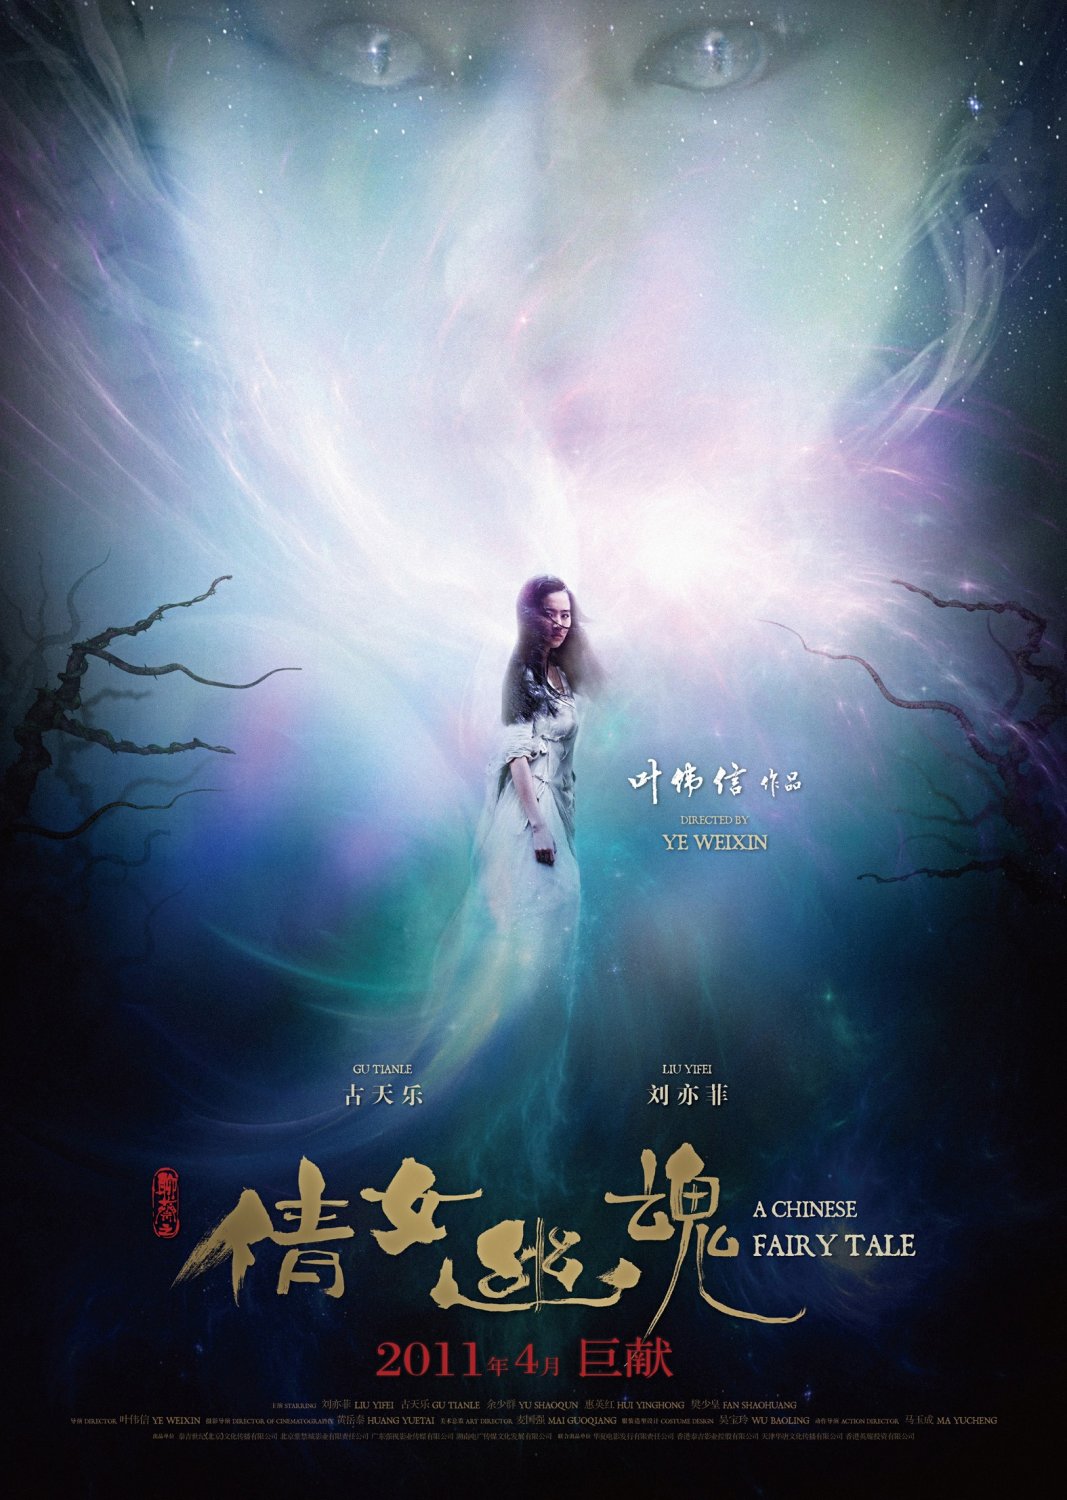 Extra Large Movie Poster Image for Sien nui yau wan (#2 of 2)